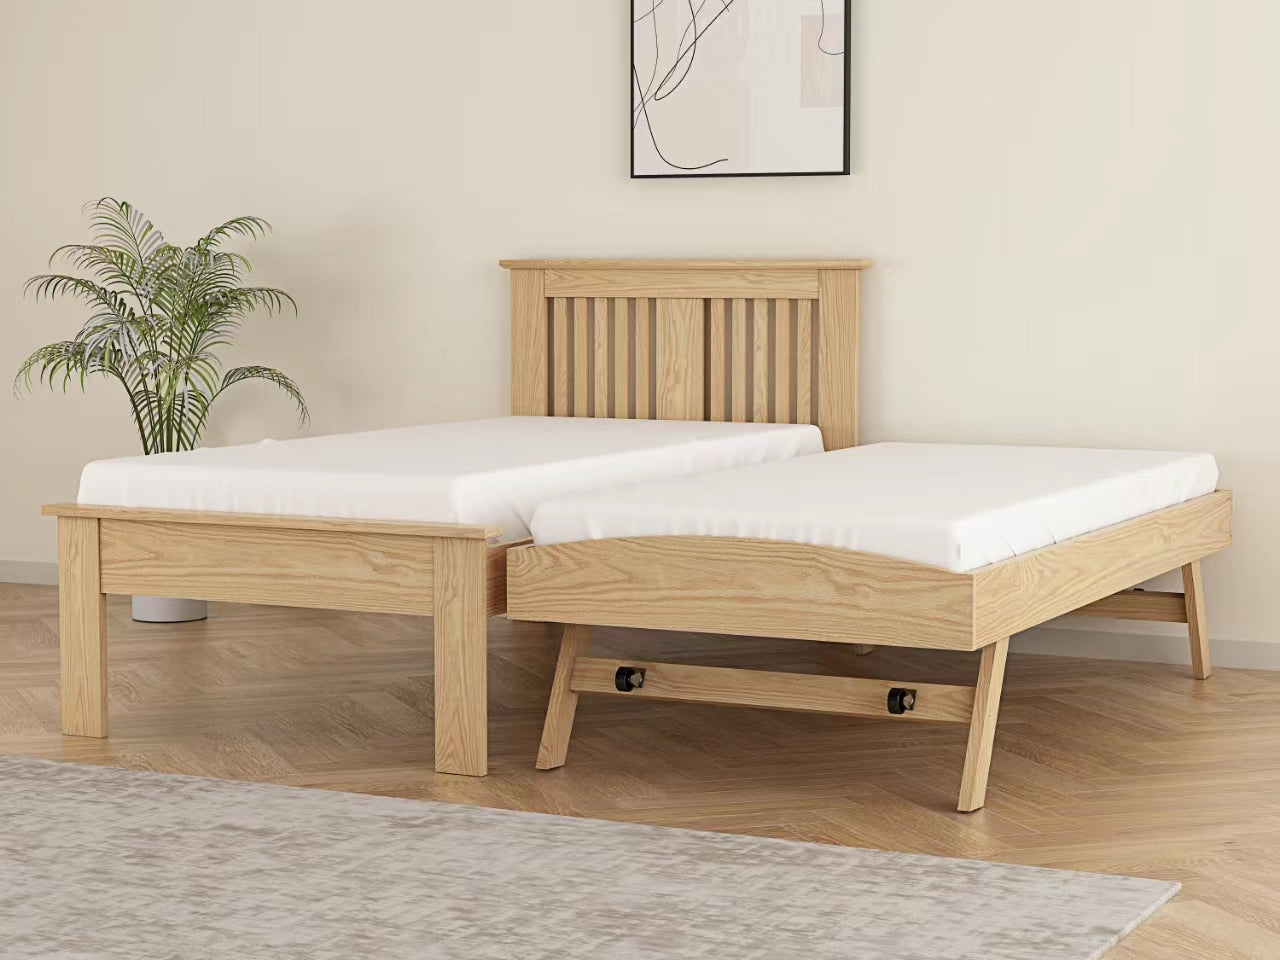 Flintshire Hendre Guest Bed Oak As A Bed-Better Bed Company